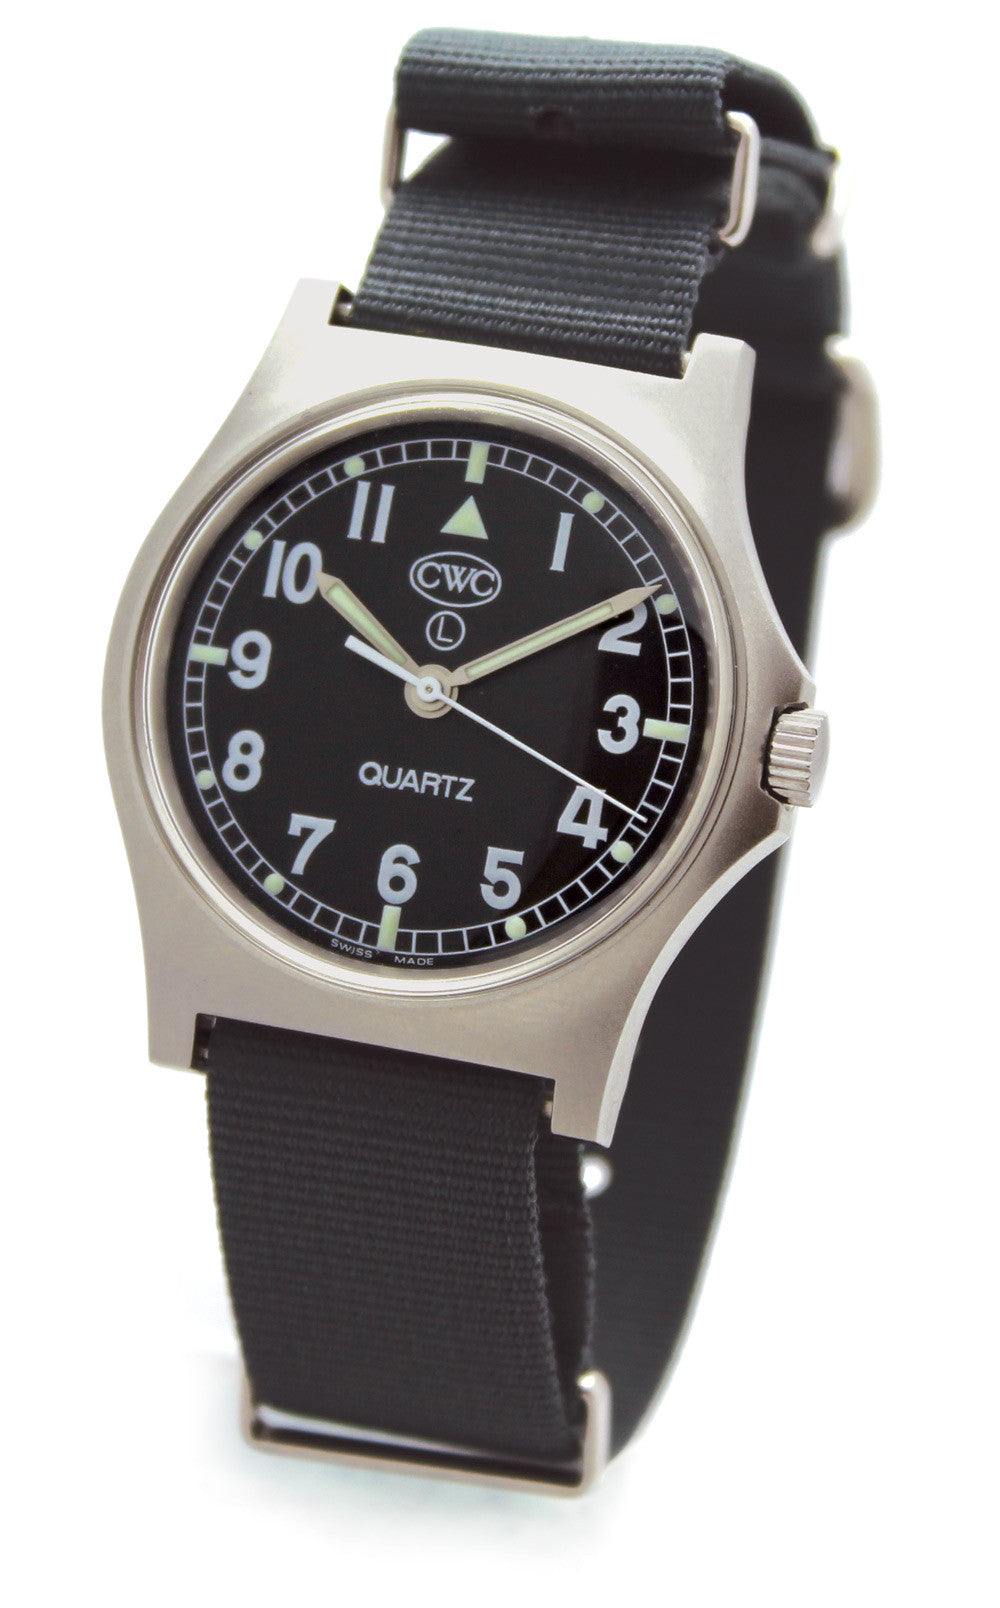 CWC G10 MILITARY ISSUE WATCH